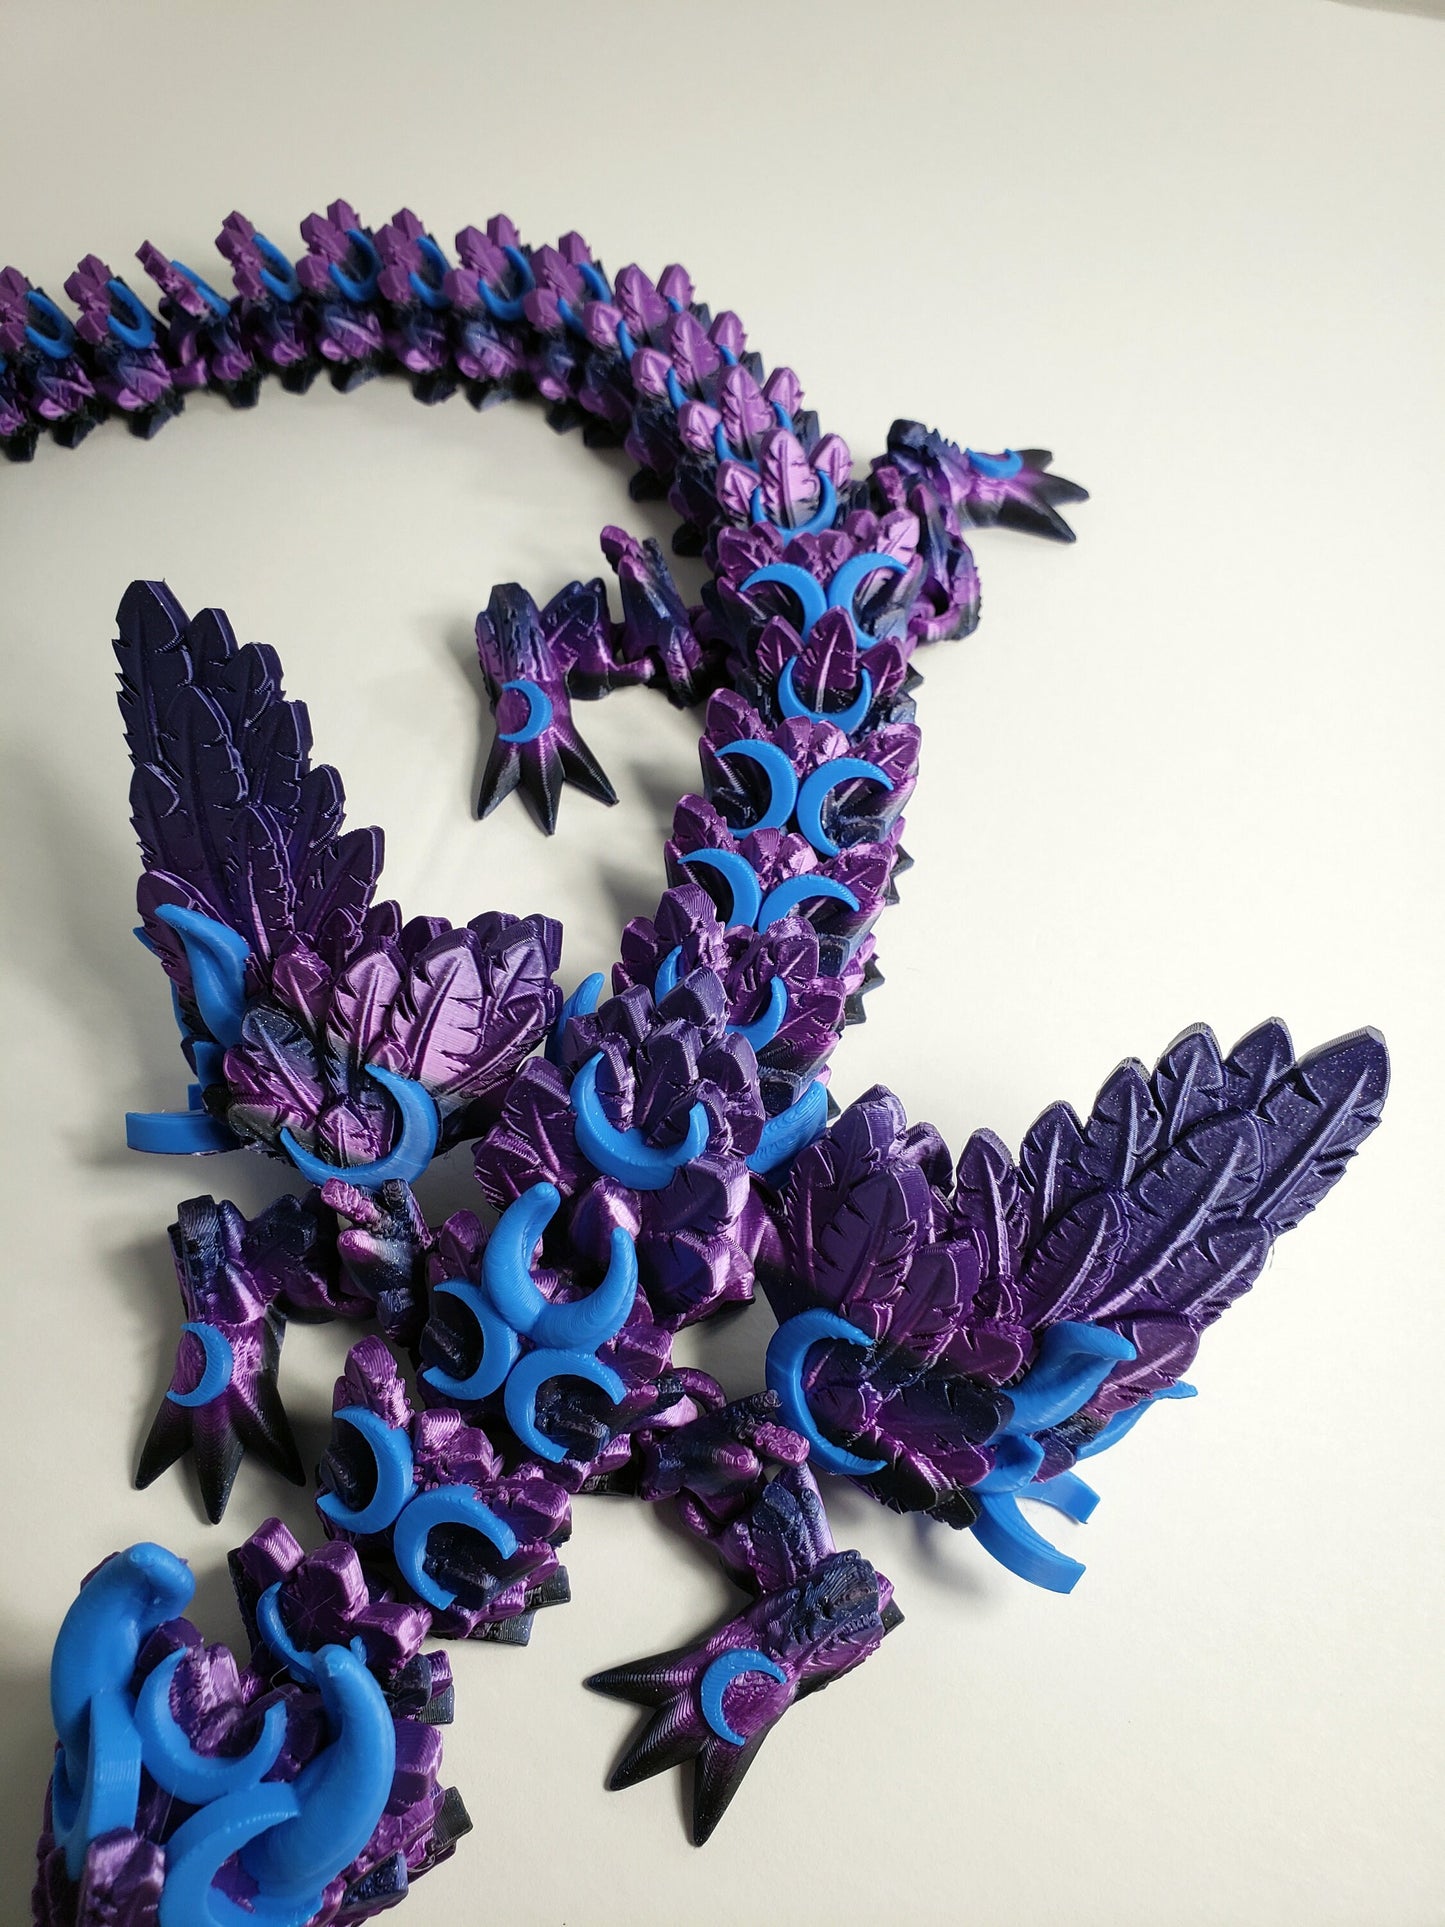 Articulated Lunar Dragon - With and Without Wings - Flexible Sensory Toy - Unique Gift